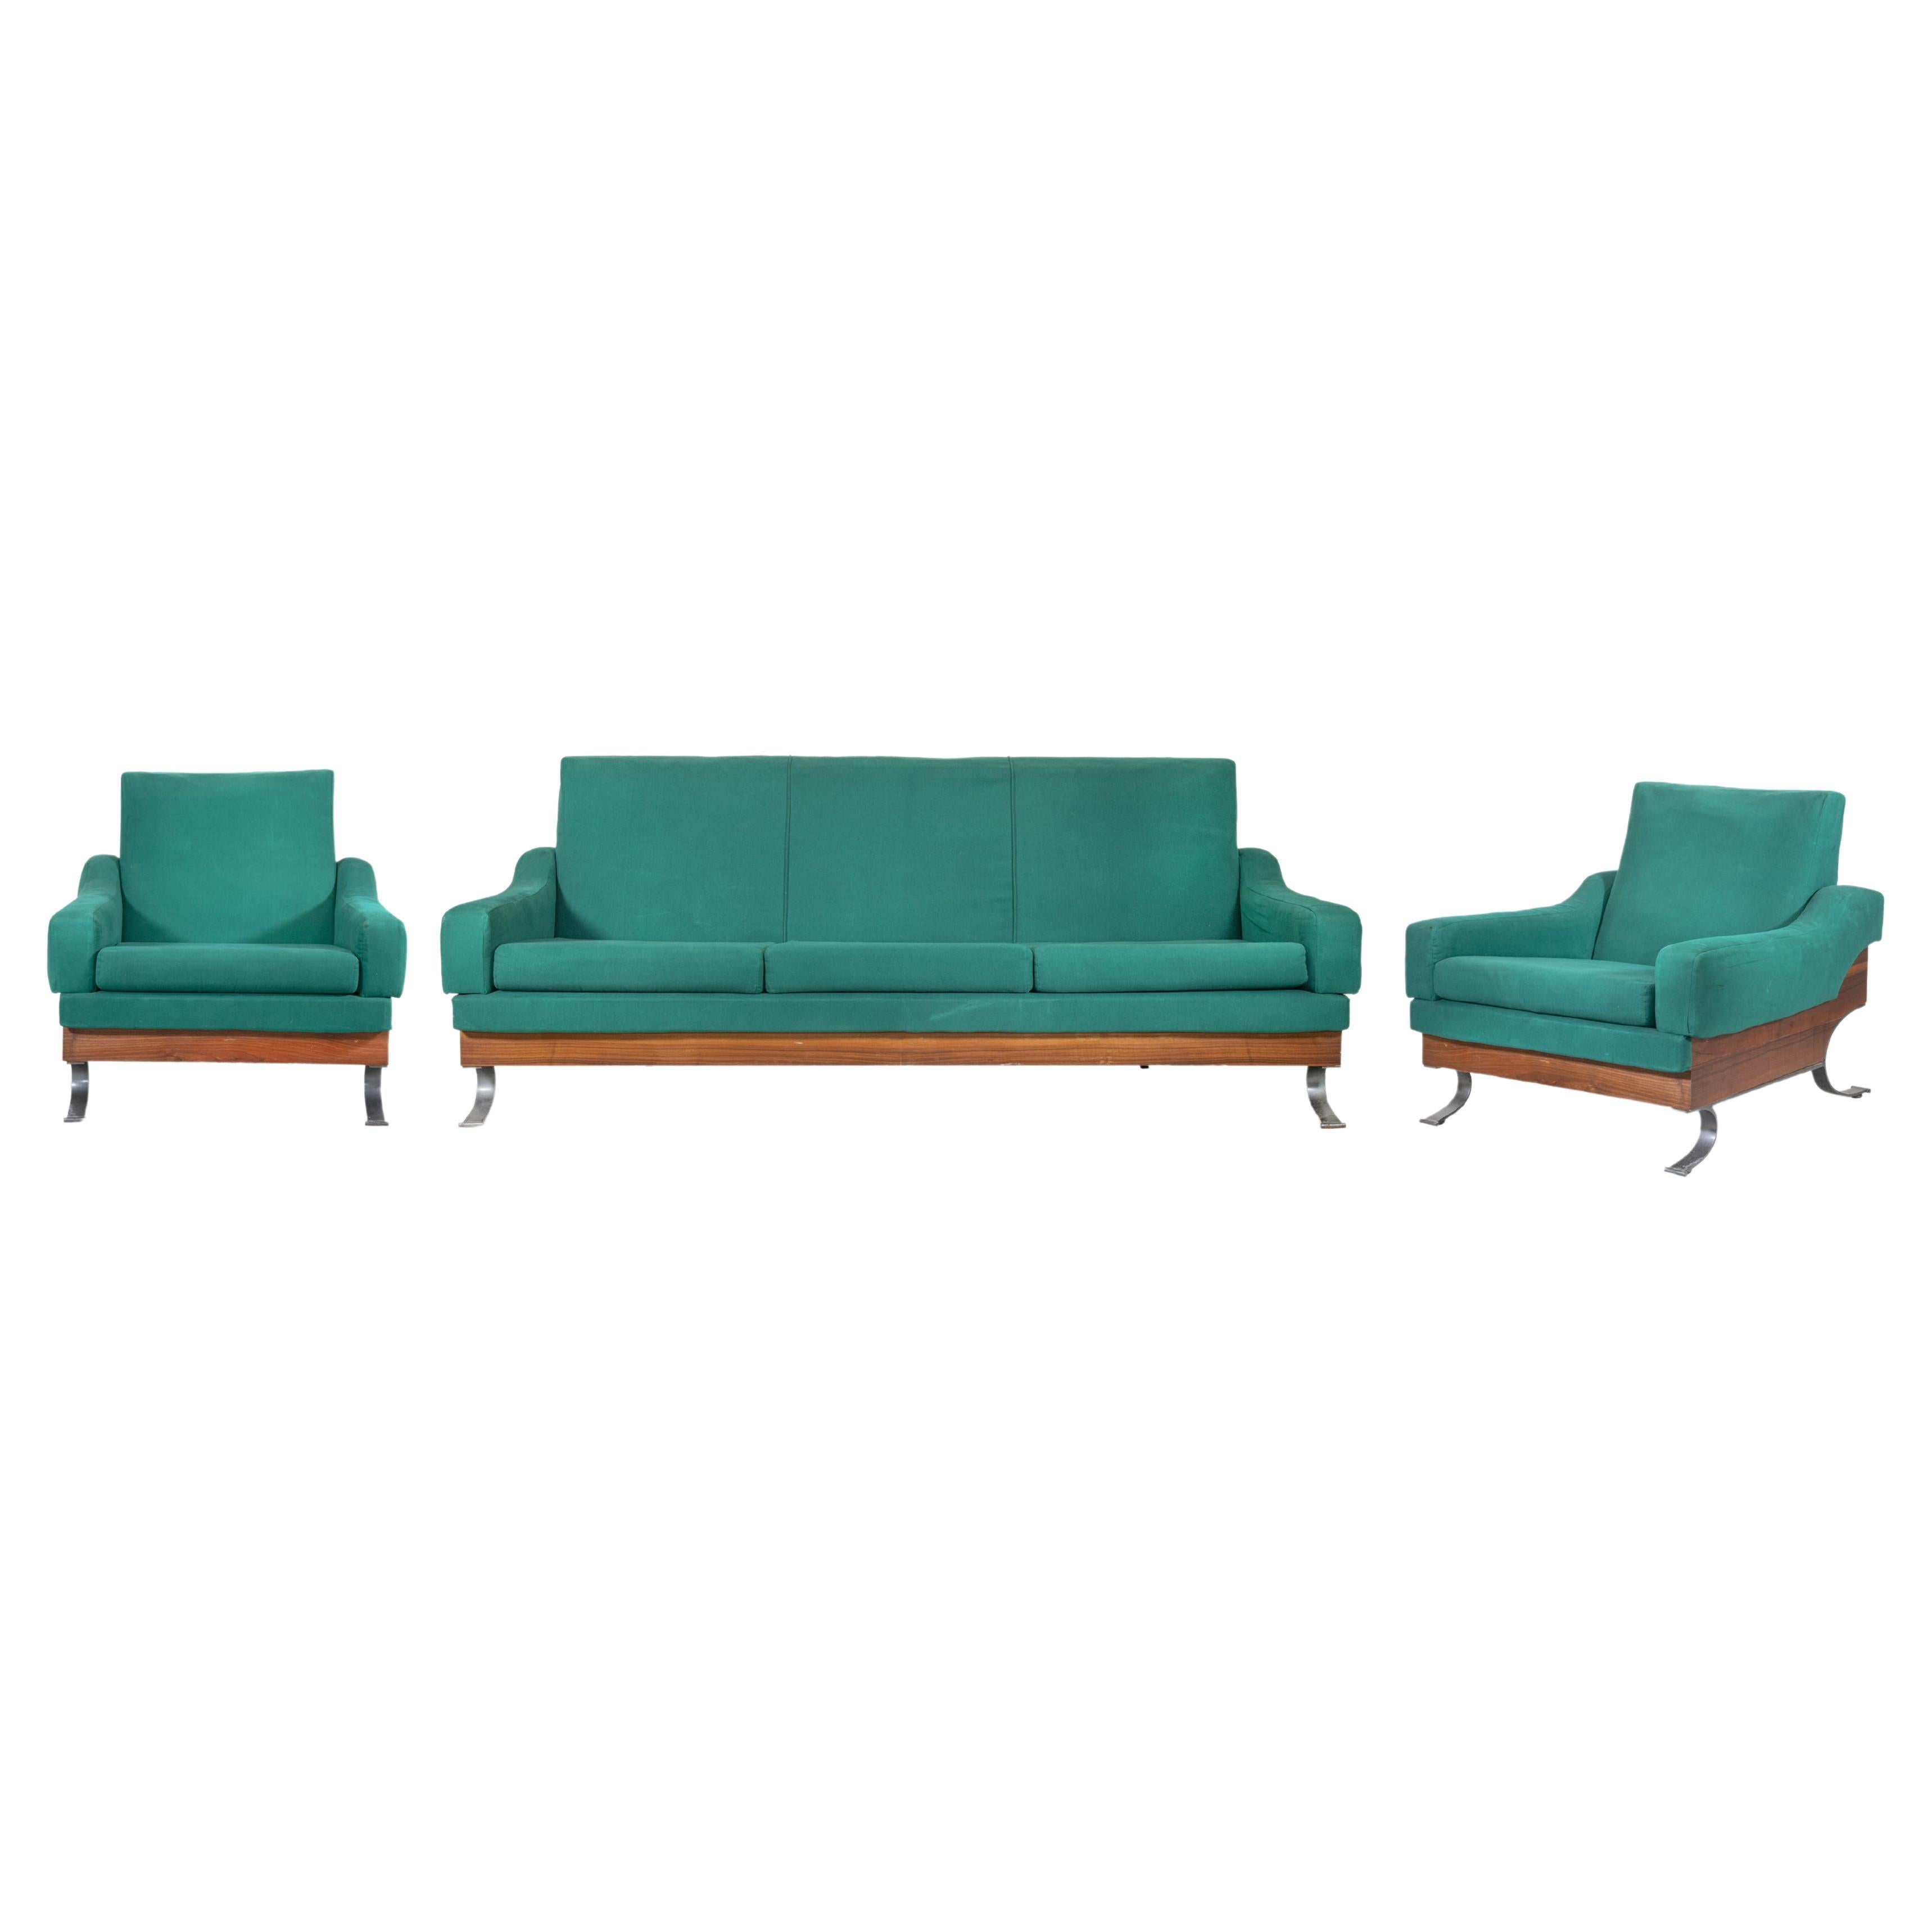 Vintage Sofa Set by Saporiti, Italy 1950s For Sale